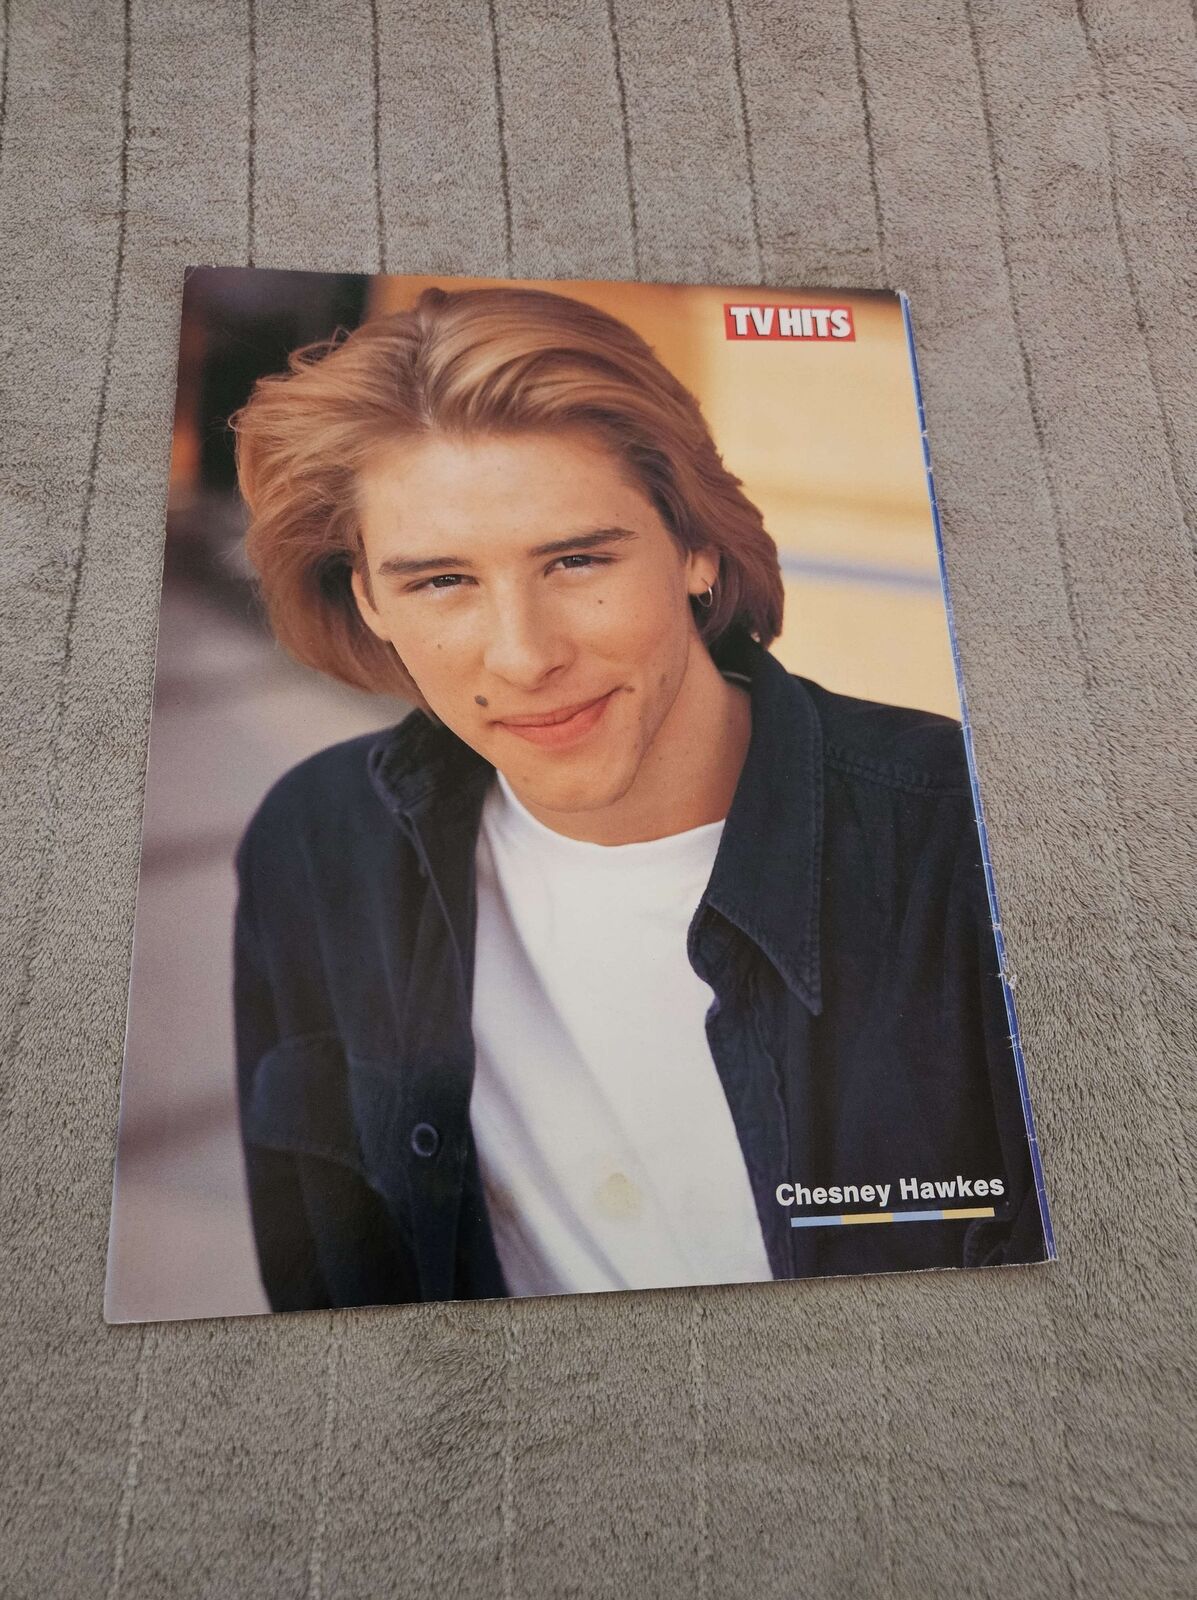 fpot199 PICTURE 12X9 CHESNEY HAWKES